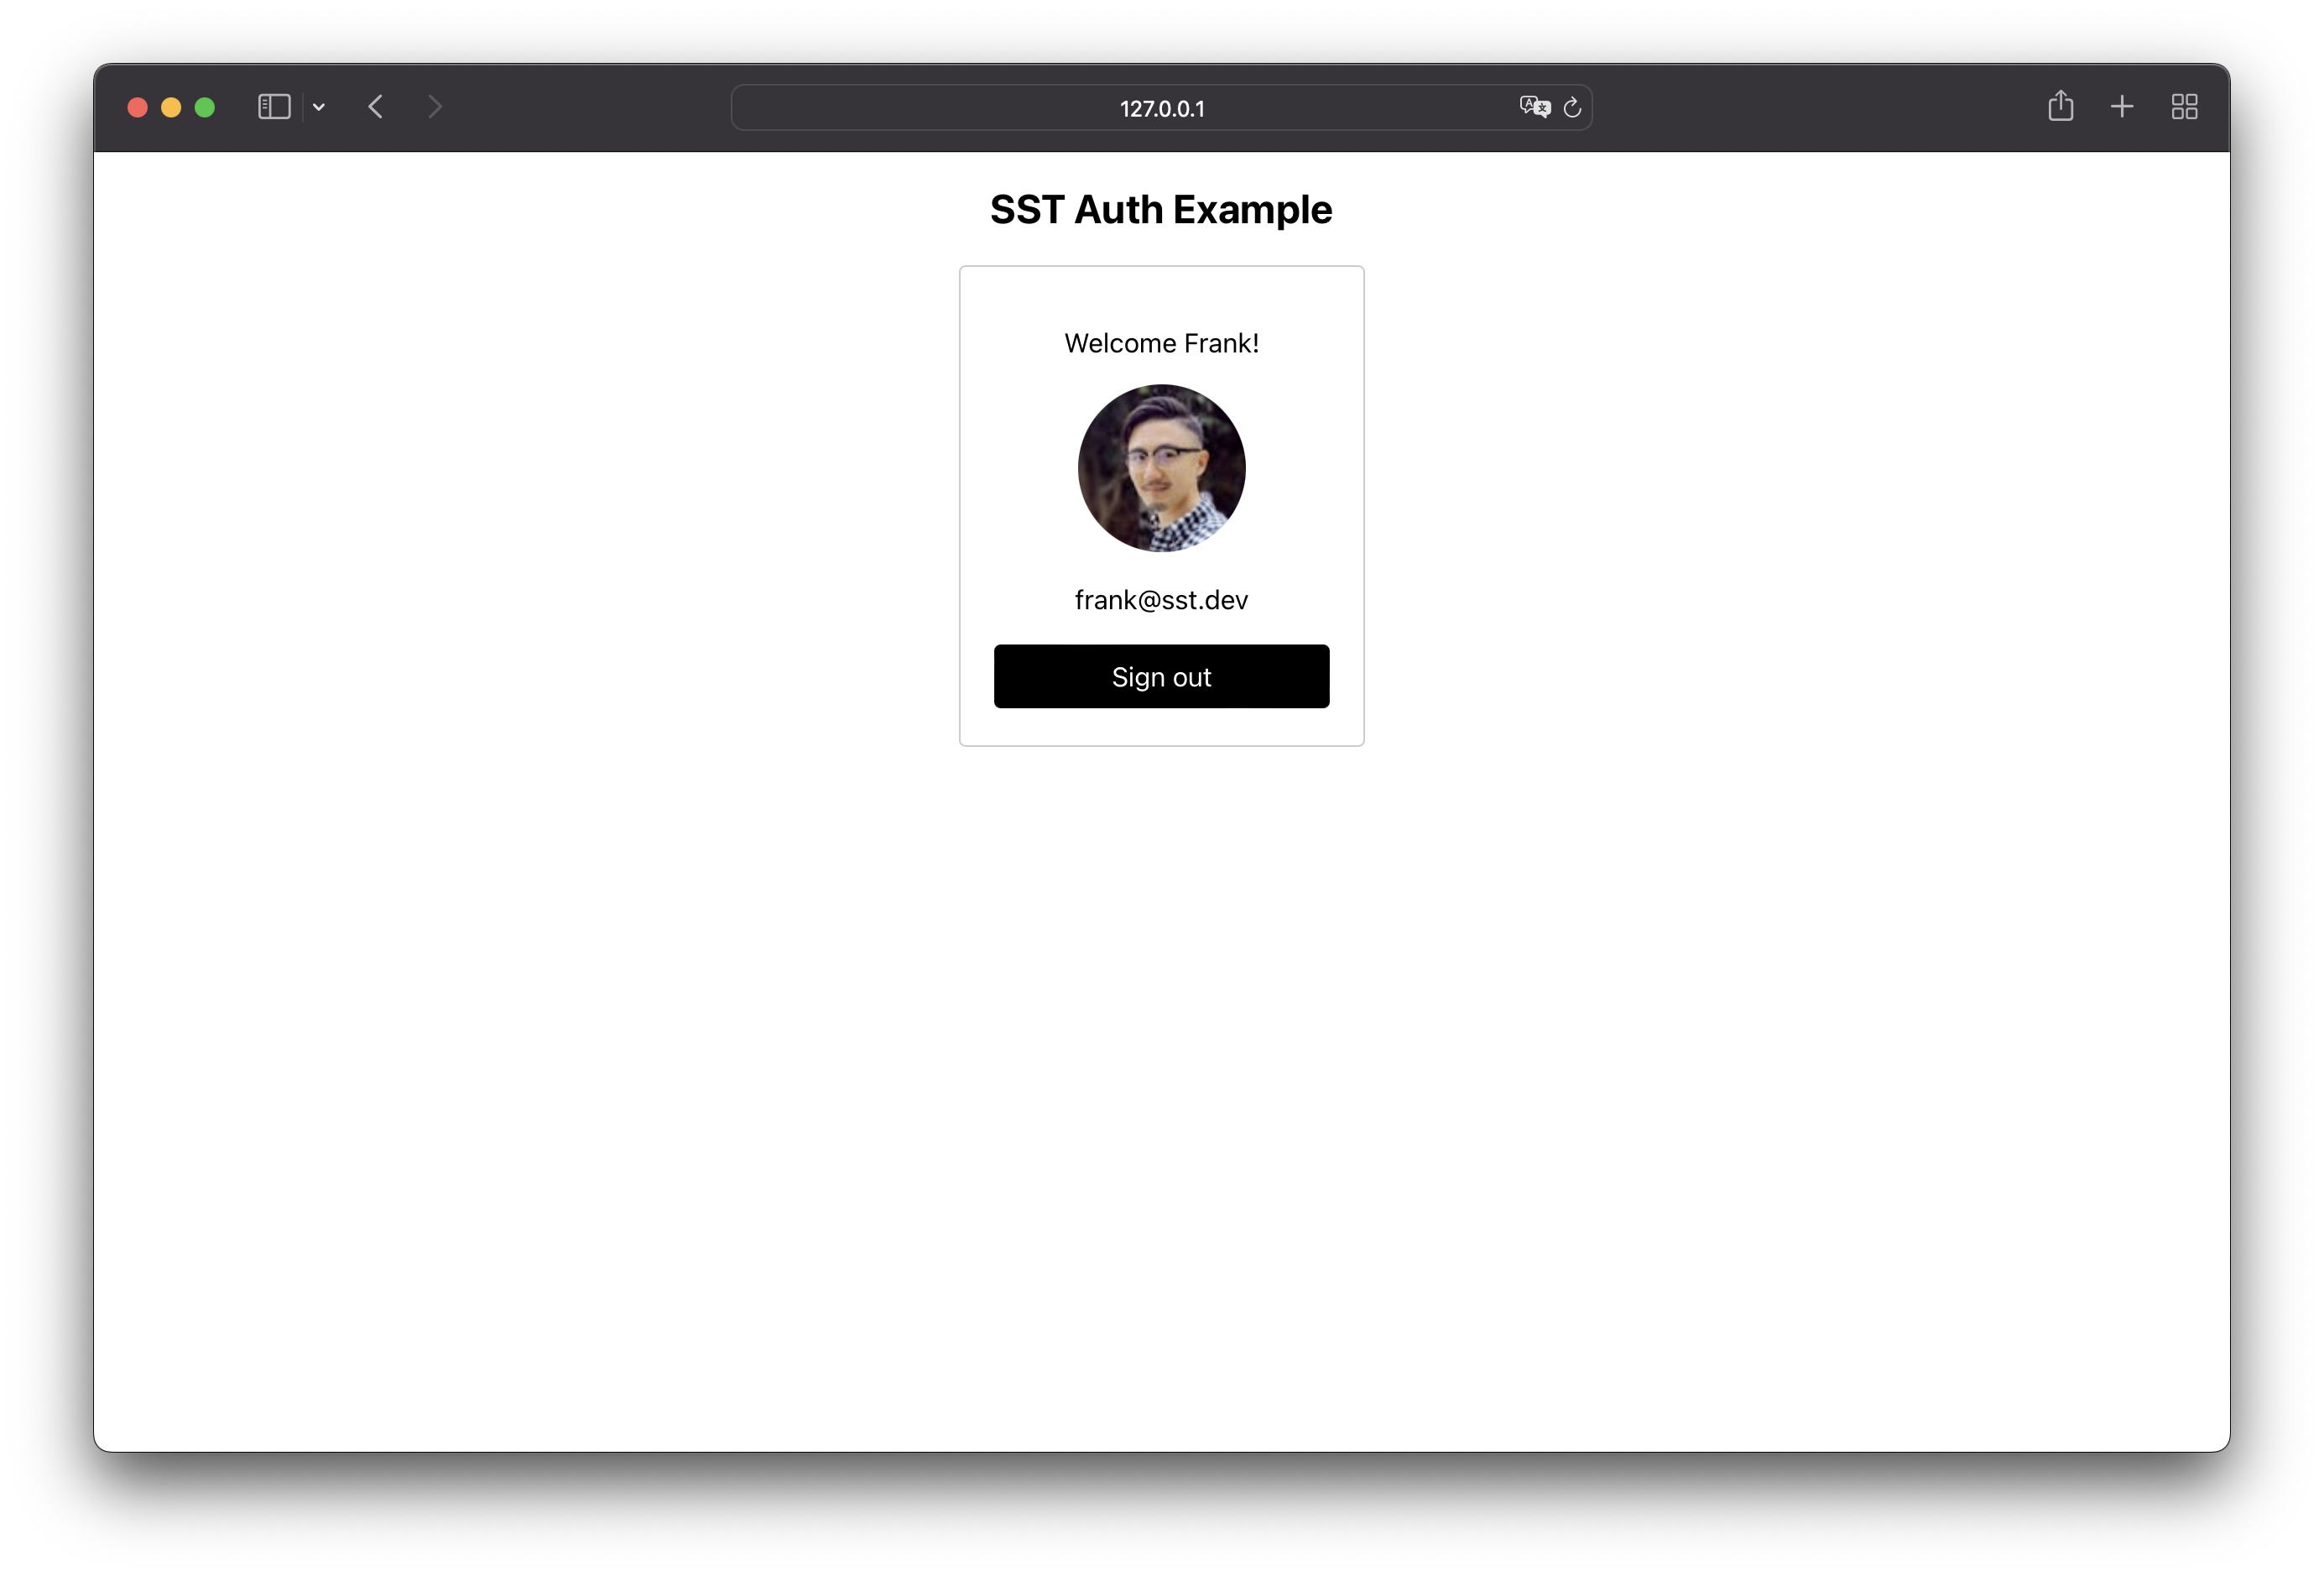 Web app signed in styled